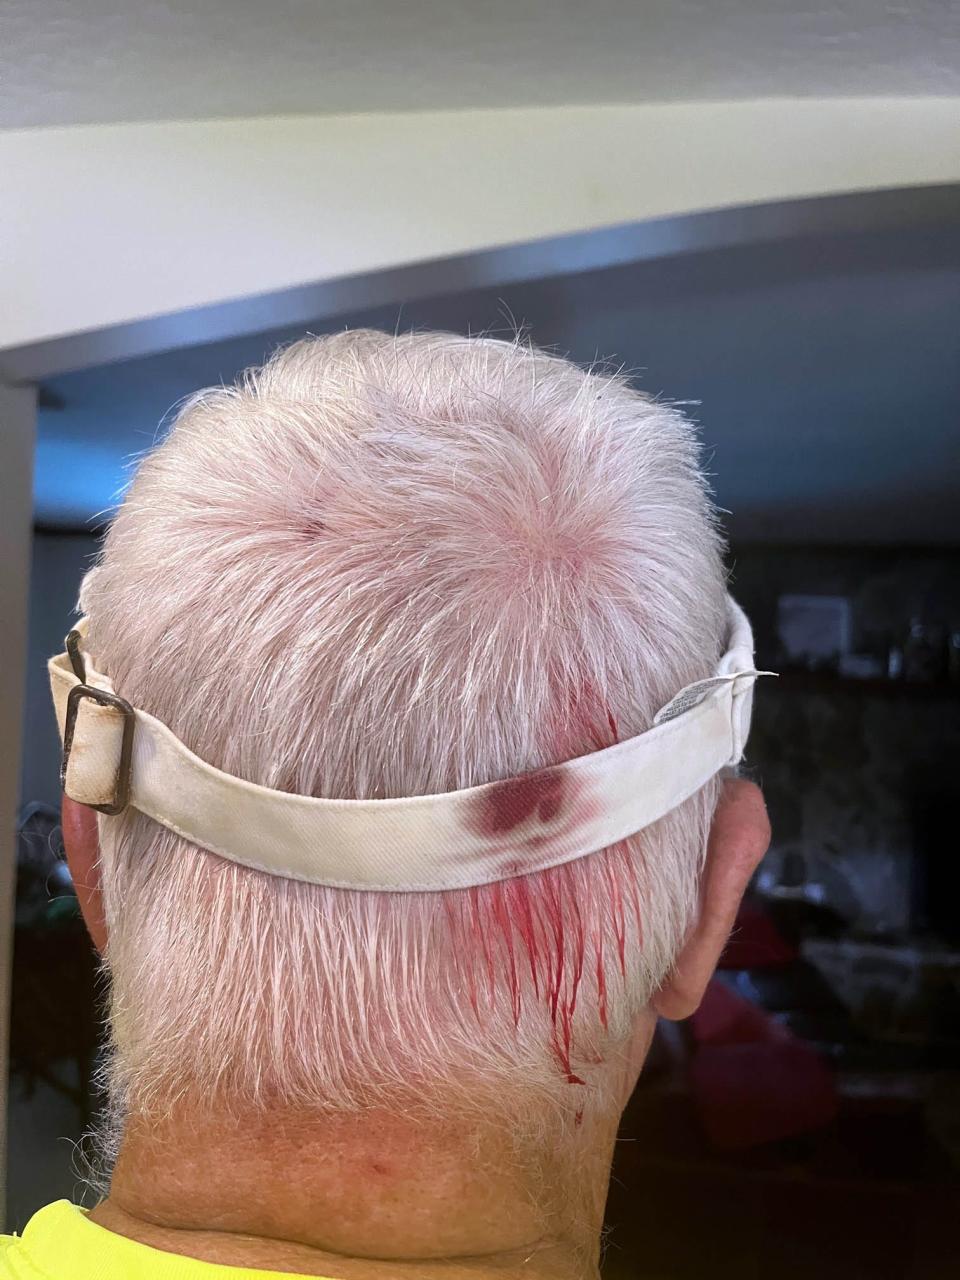 Terry Hayden of Titusville shows the injuries he received when he was attacked by a hawk while walking recently. Residents in the Whispering Hills neighborhood have reported being attacked by hawks nesting in the area.
(Photo: Photo provided by Terry Hayden)